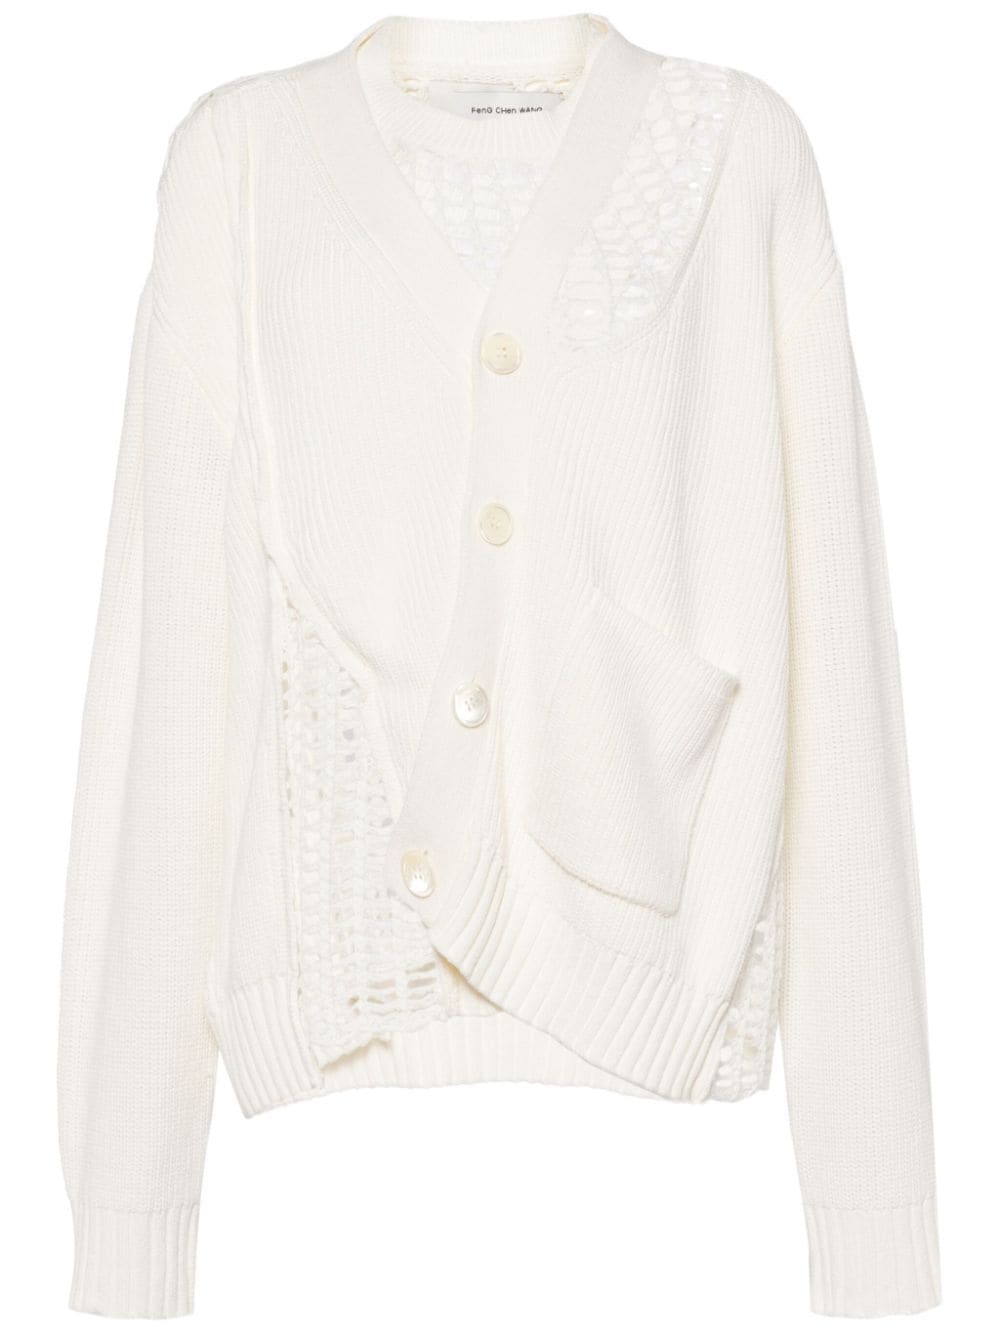 Feng Chen Wang Open-knit Layered Cotton Cardigan In White